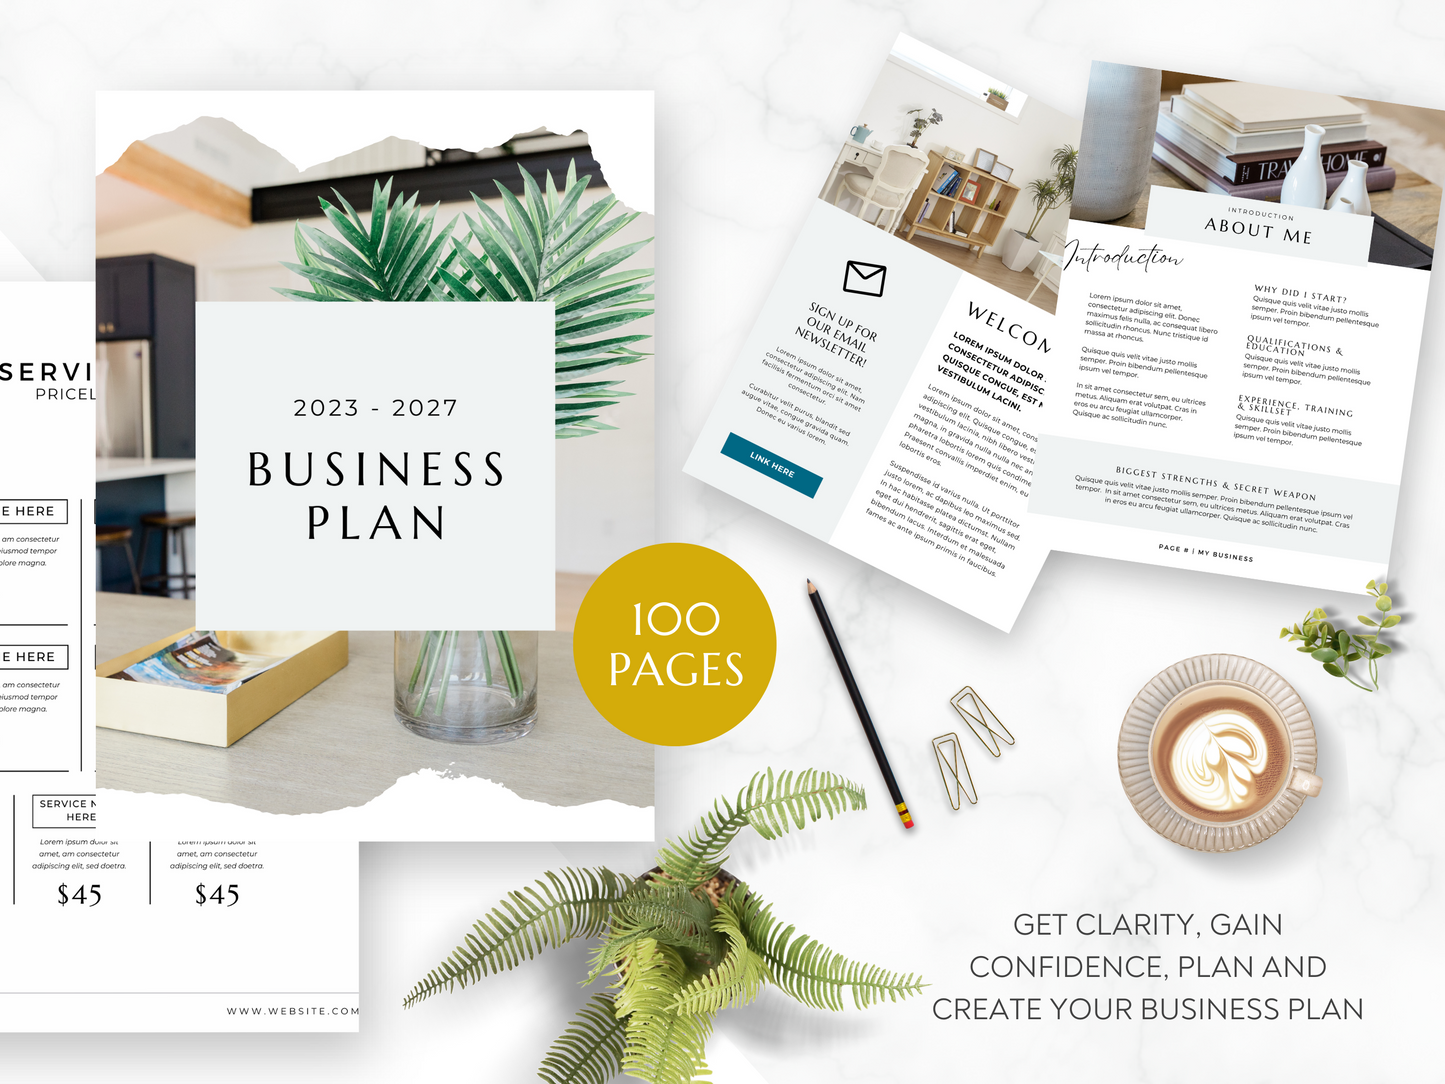 The Business Planner